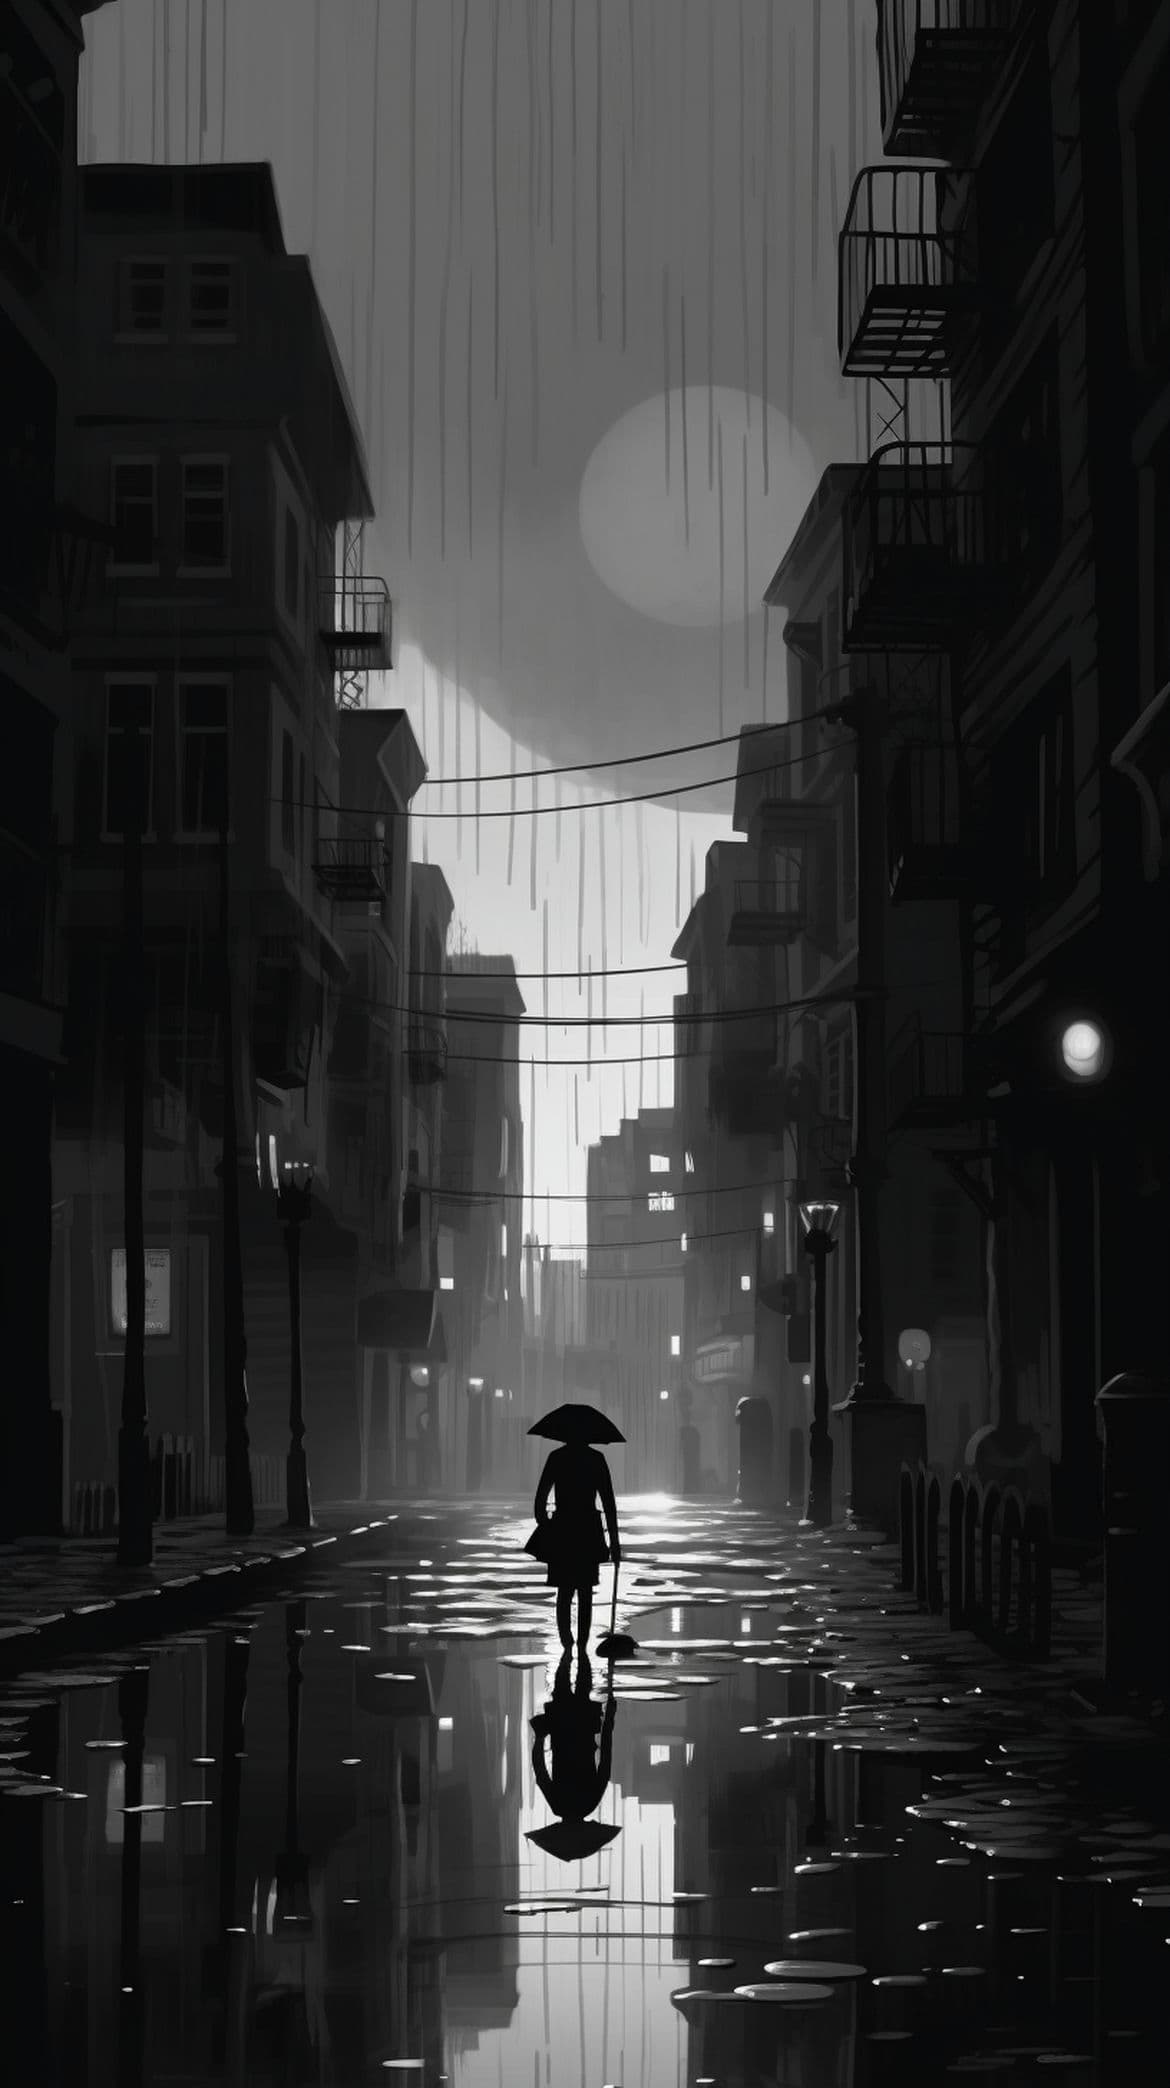 Black and white illustration of a person walking down a street in the rain - Black